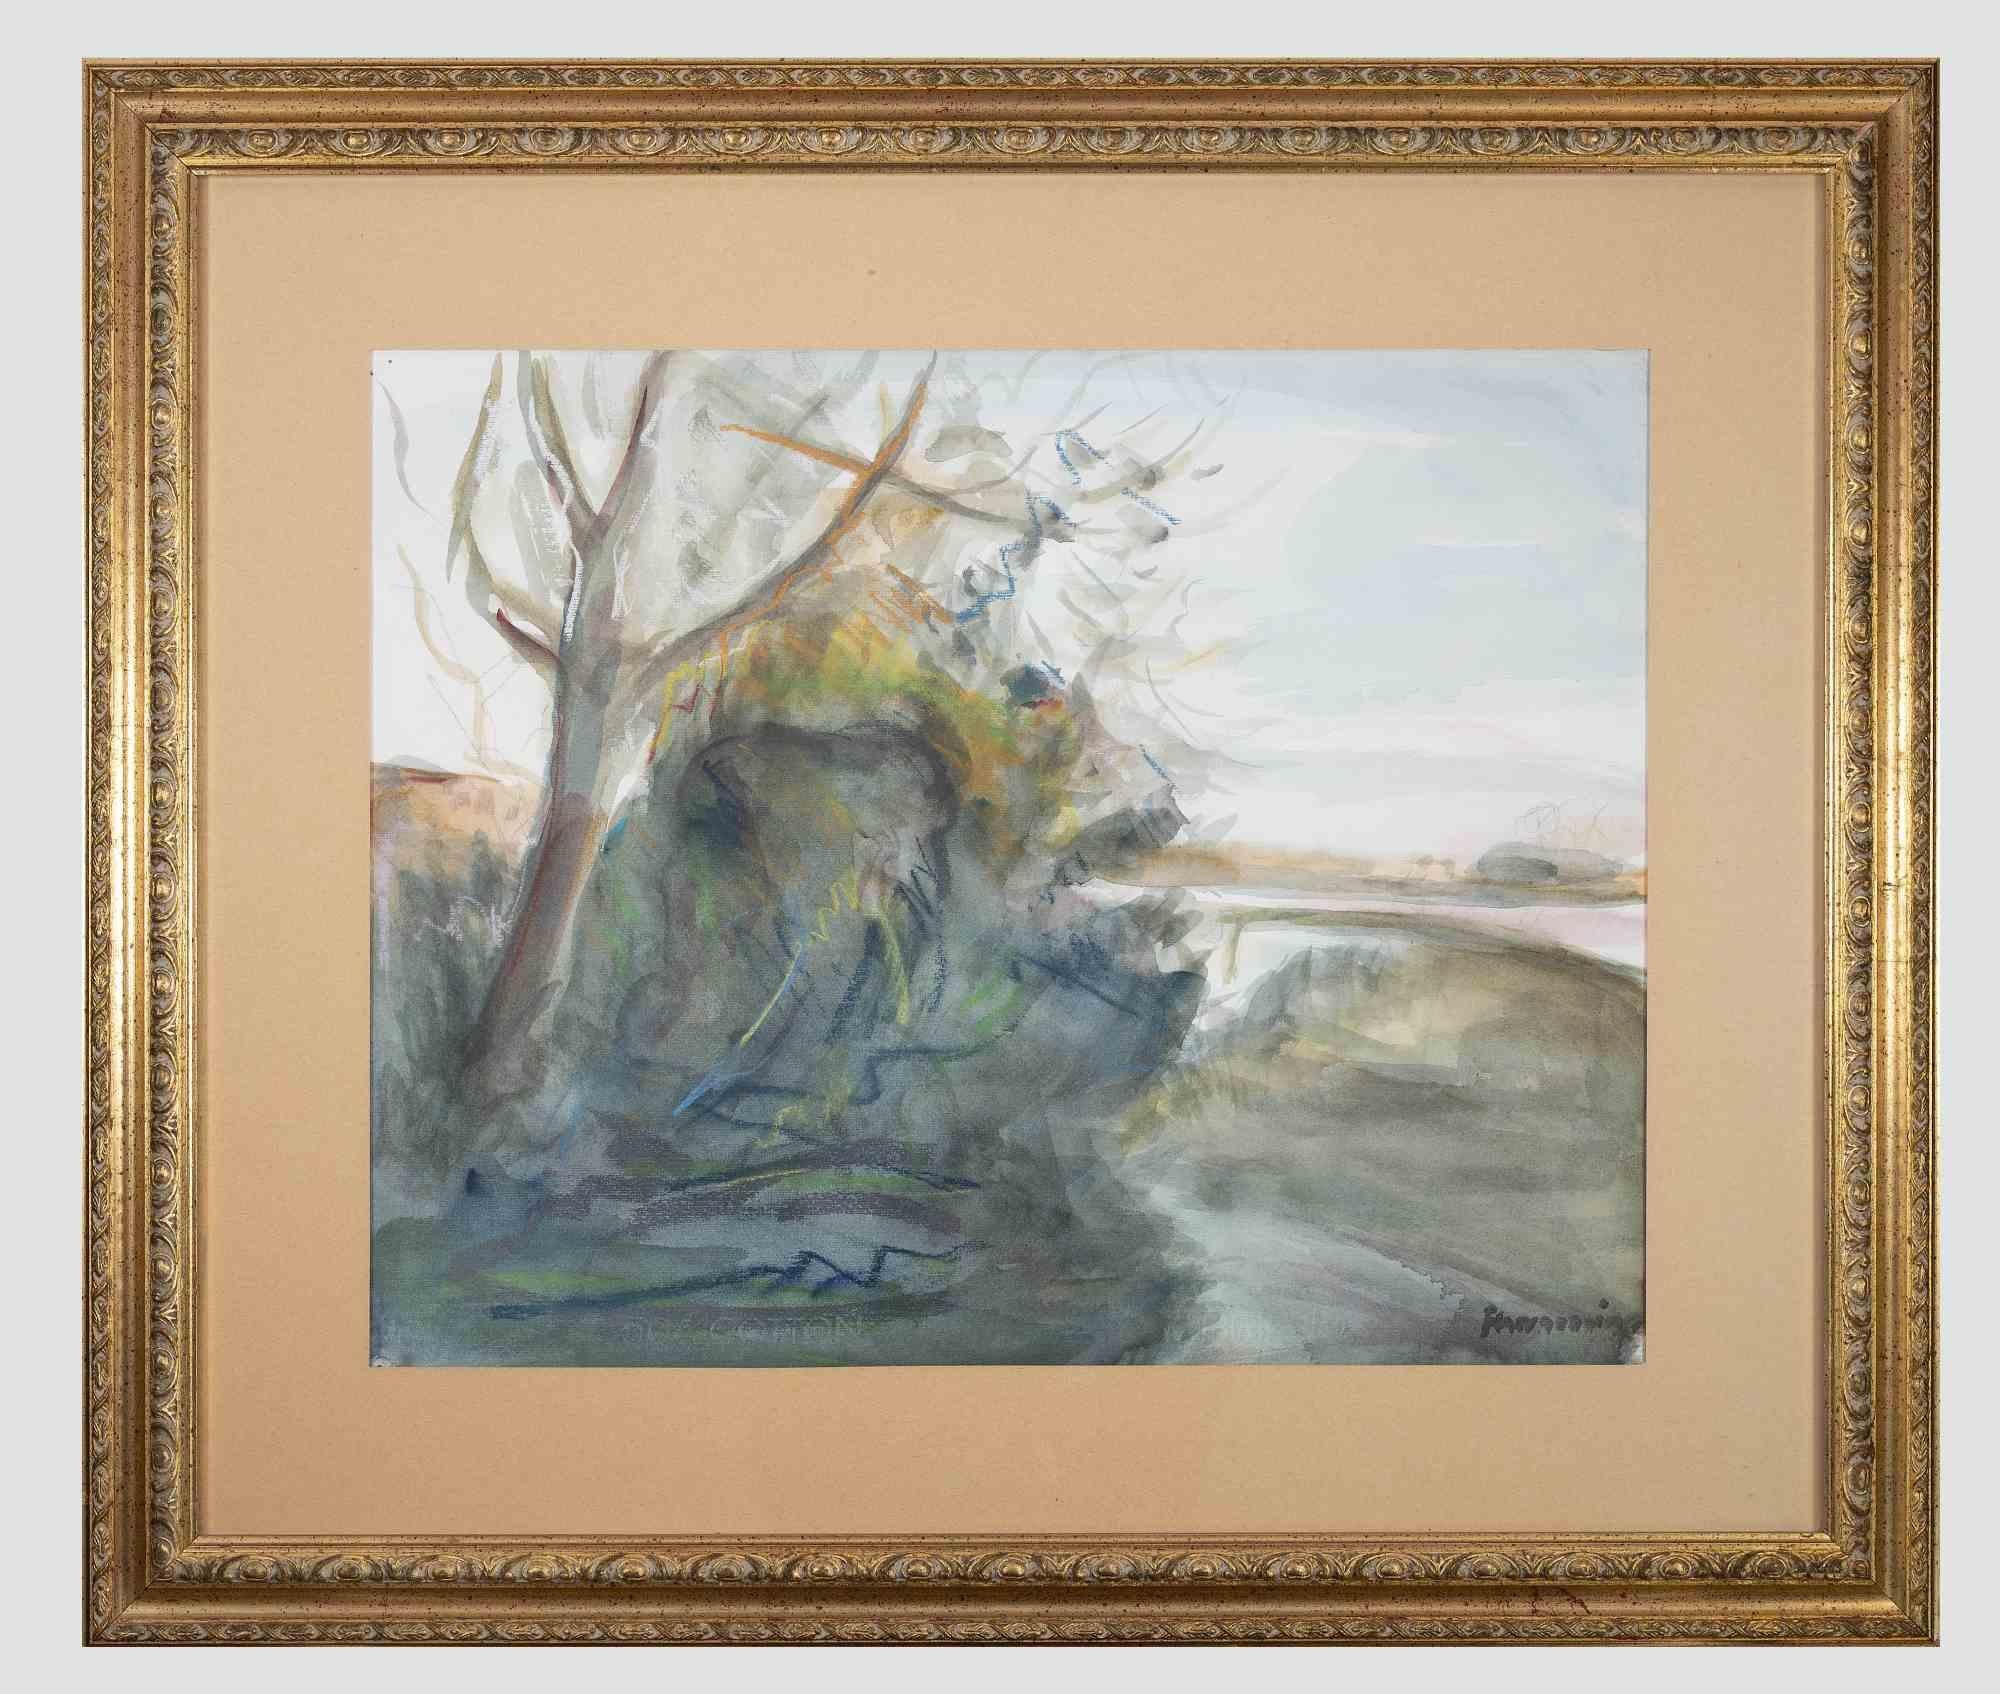 Landscape is an original watercolour on paper realized by Alfonso Avanessian in the 1990s.

The piece is hand signed lower right.

Good condition.

Frame included: 61x72 cm